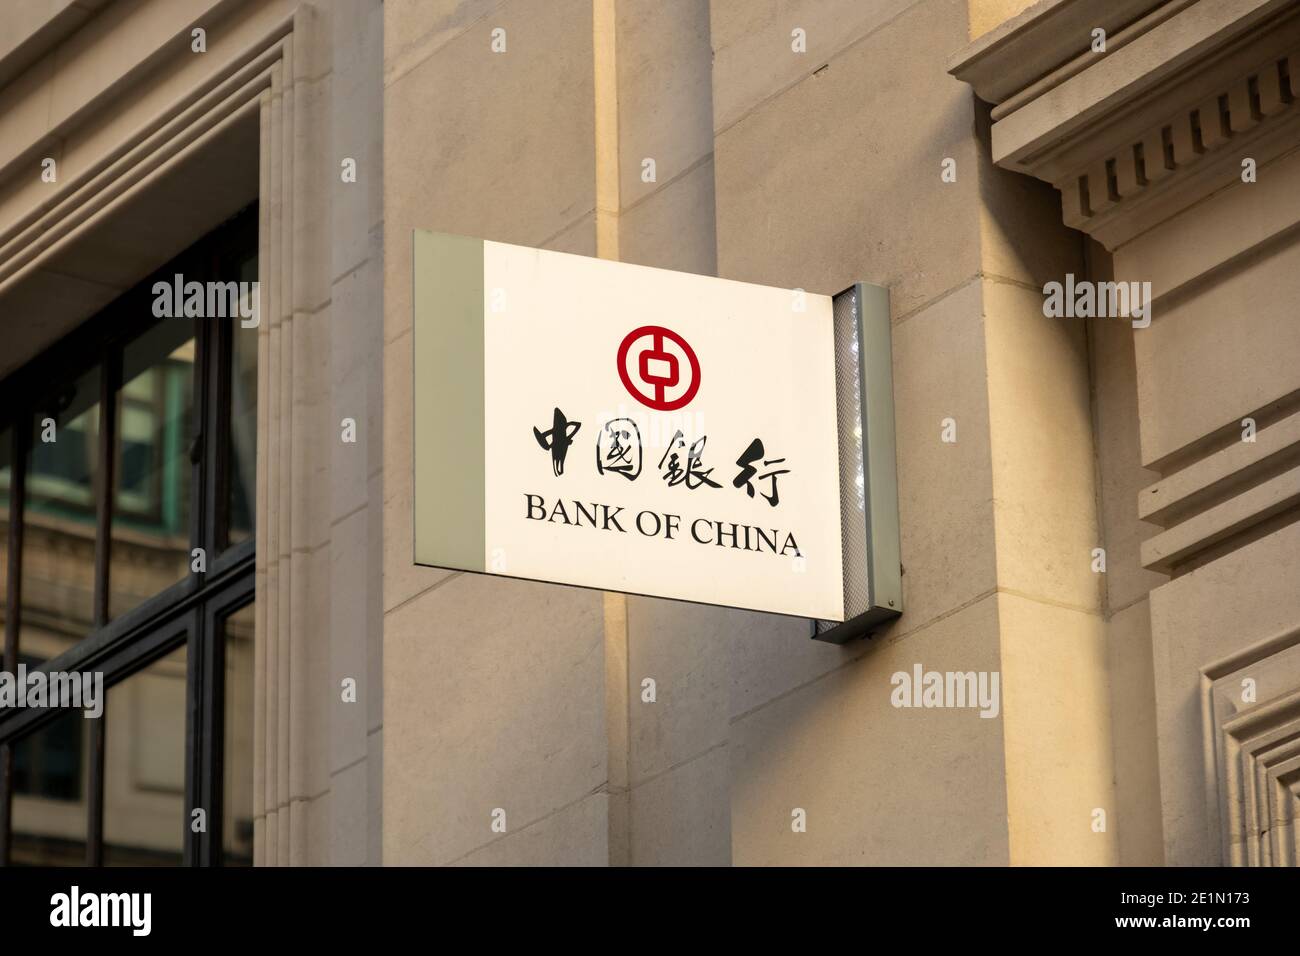 LONDON- Bank of China exterior signage- London branch of the Chinese state-owned commercial bank Stock Photo